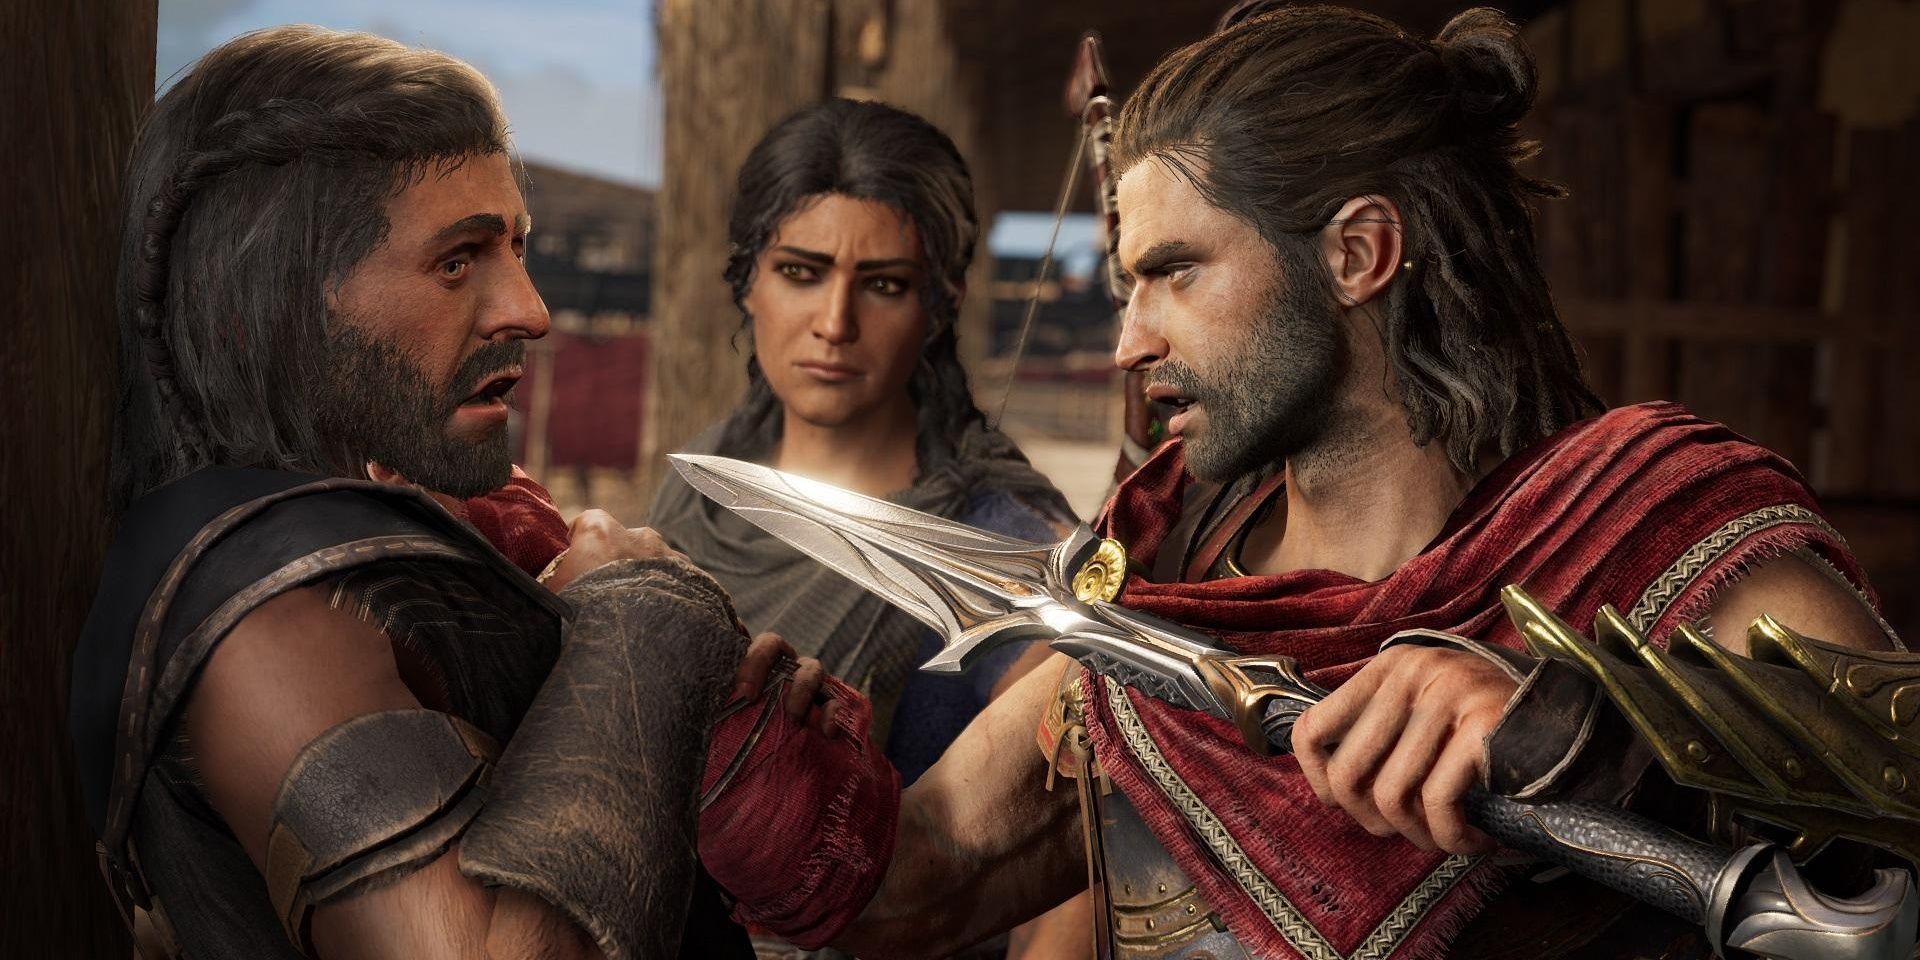 Assassin's Creed Odyssey protagonist Alexios threatening another man with a blade as a woman looks on.